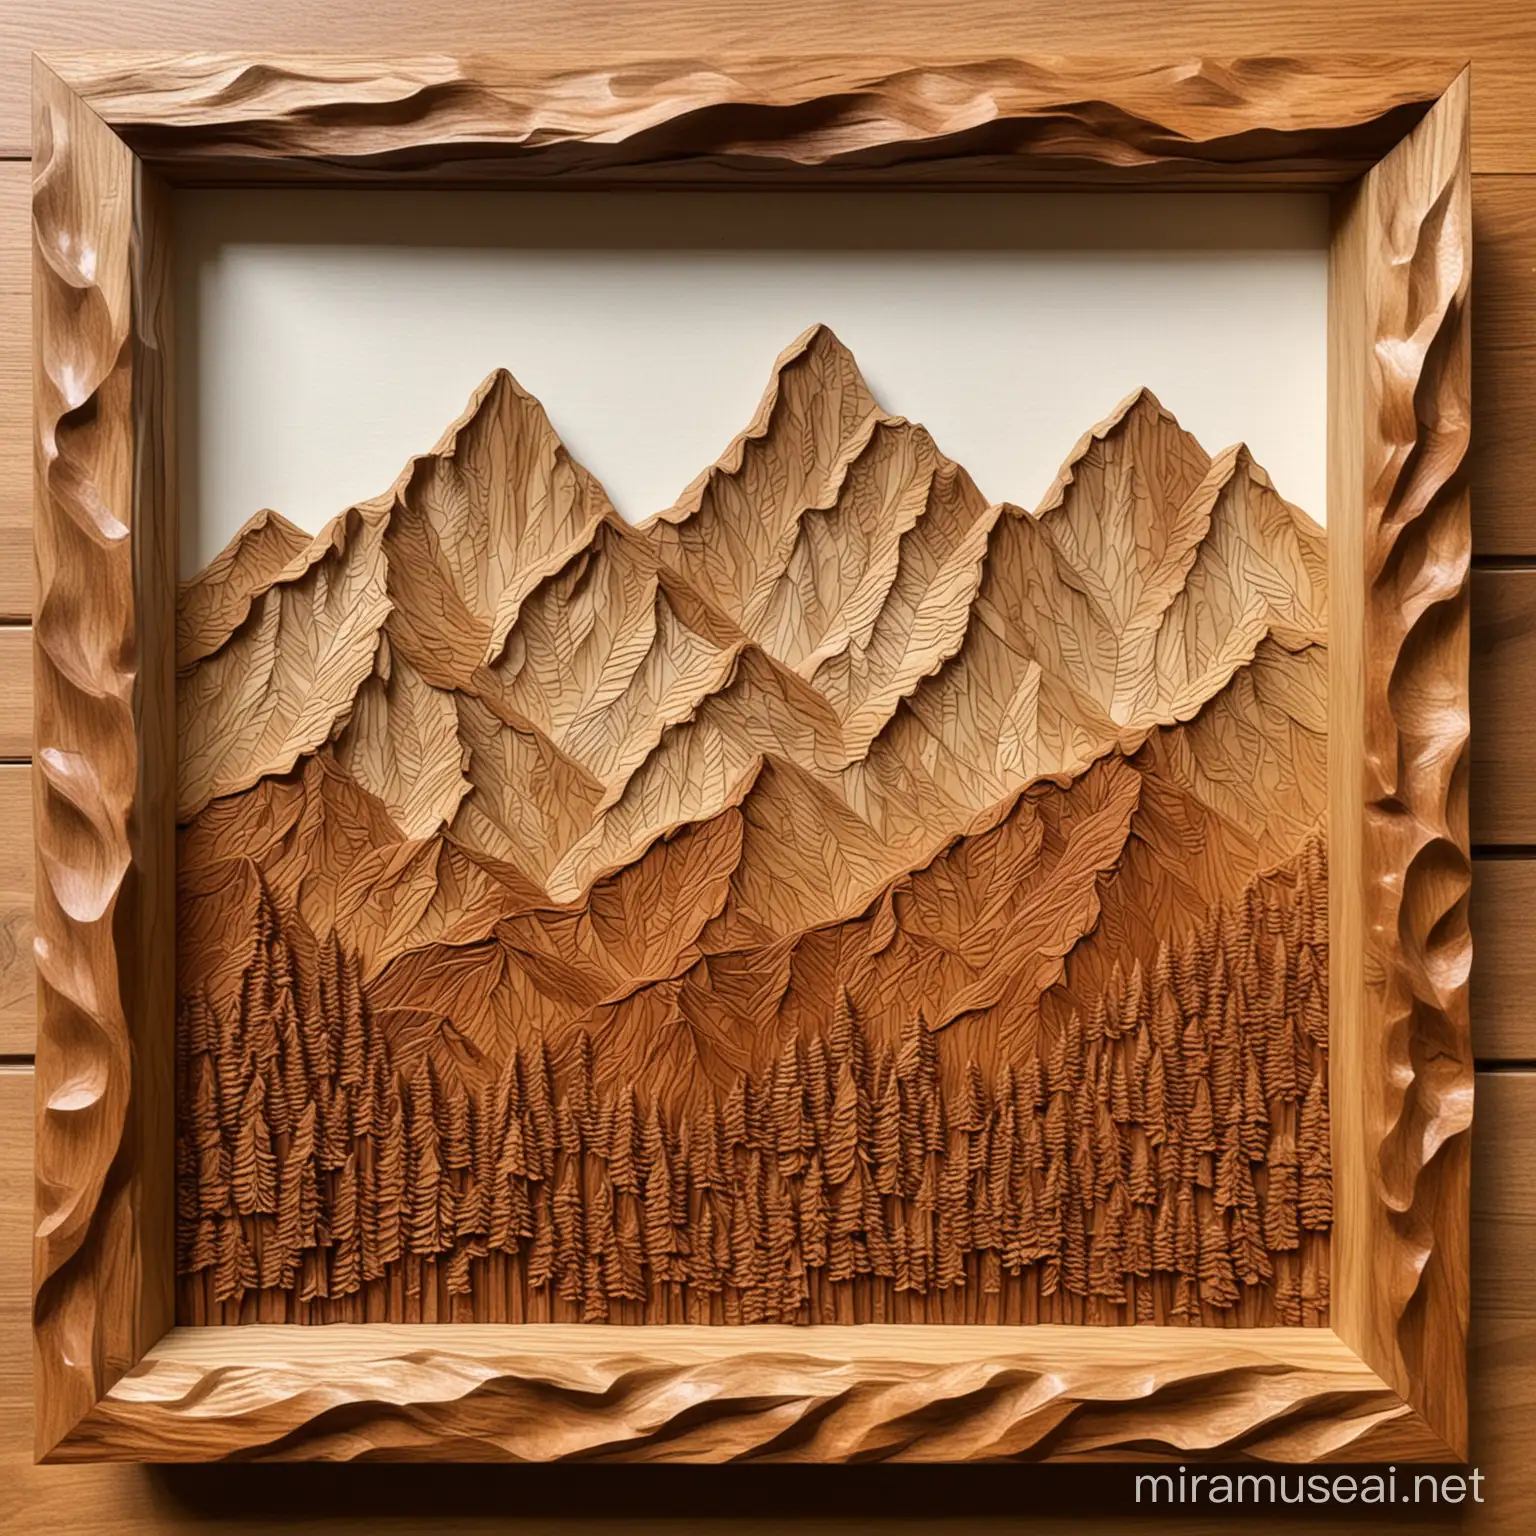 Textured Carved Wood Mountain Range Framed with Leaf Texture